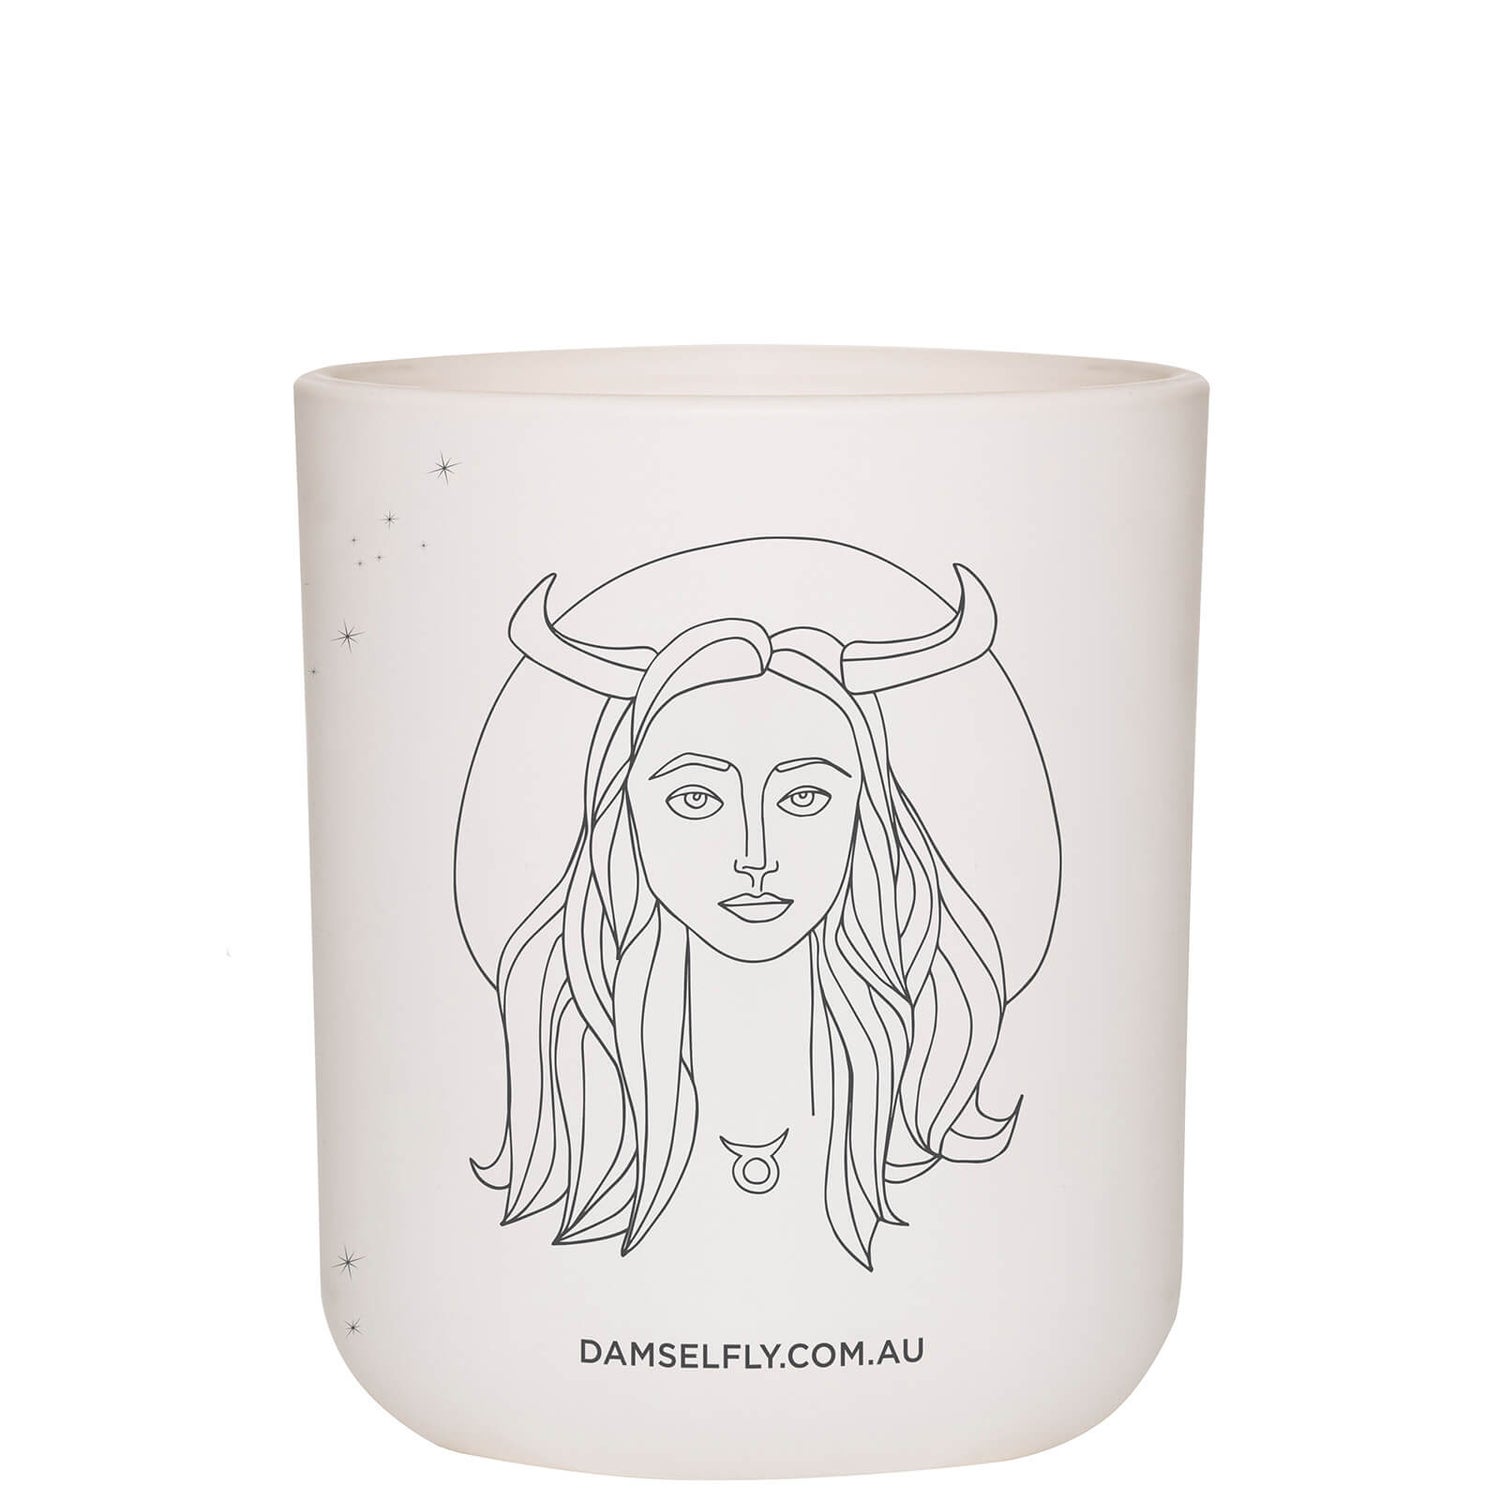 Damselfly Taurus Scented Candle - 300g